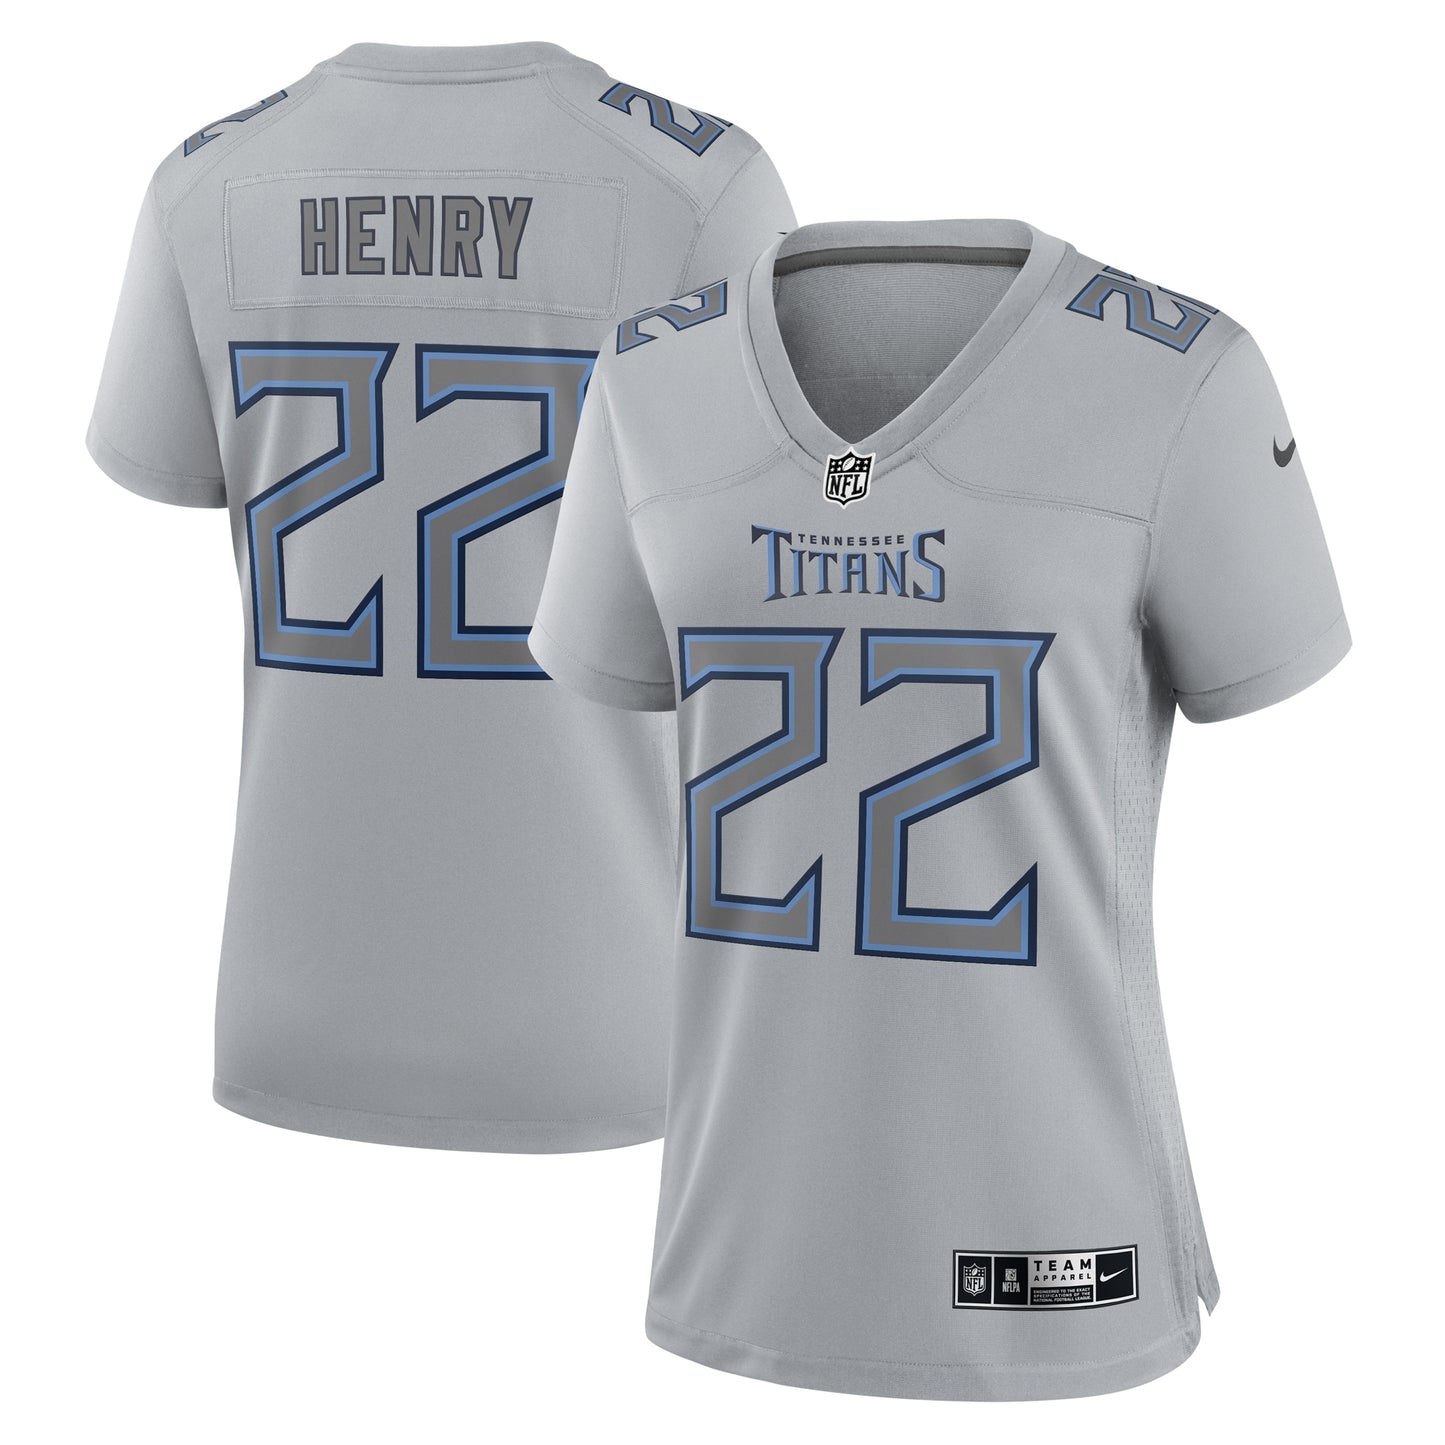 Derrick Henry Tennessee Titans Nike Women's Atmosphere Fashion Game Jersey - Gray